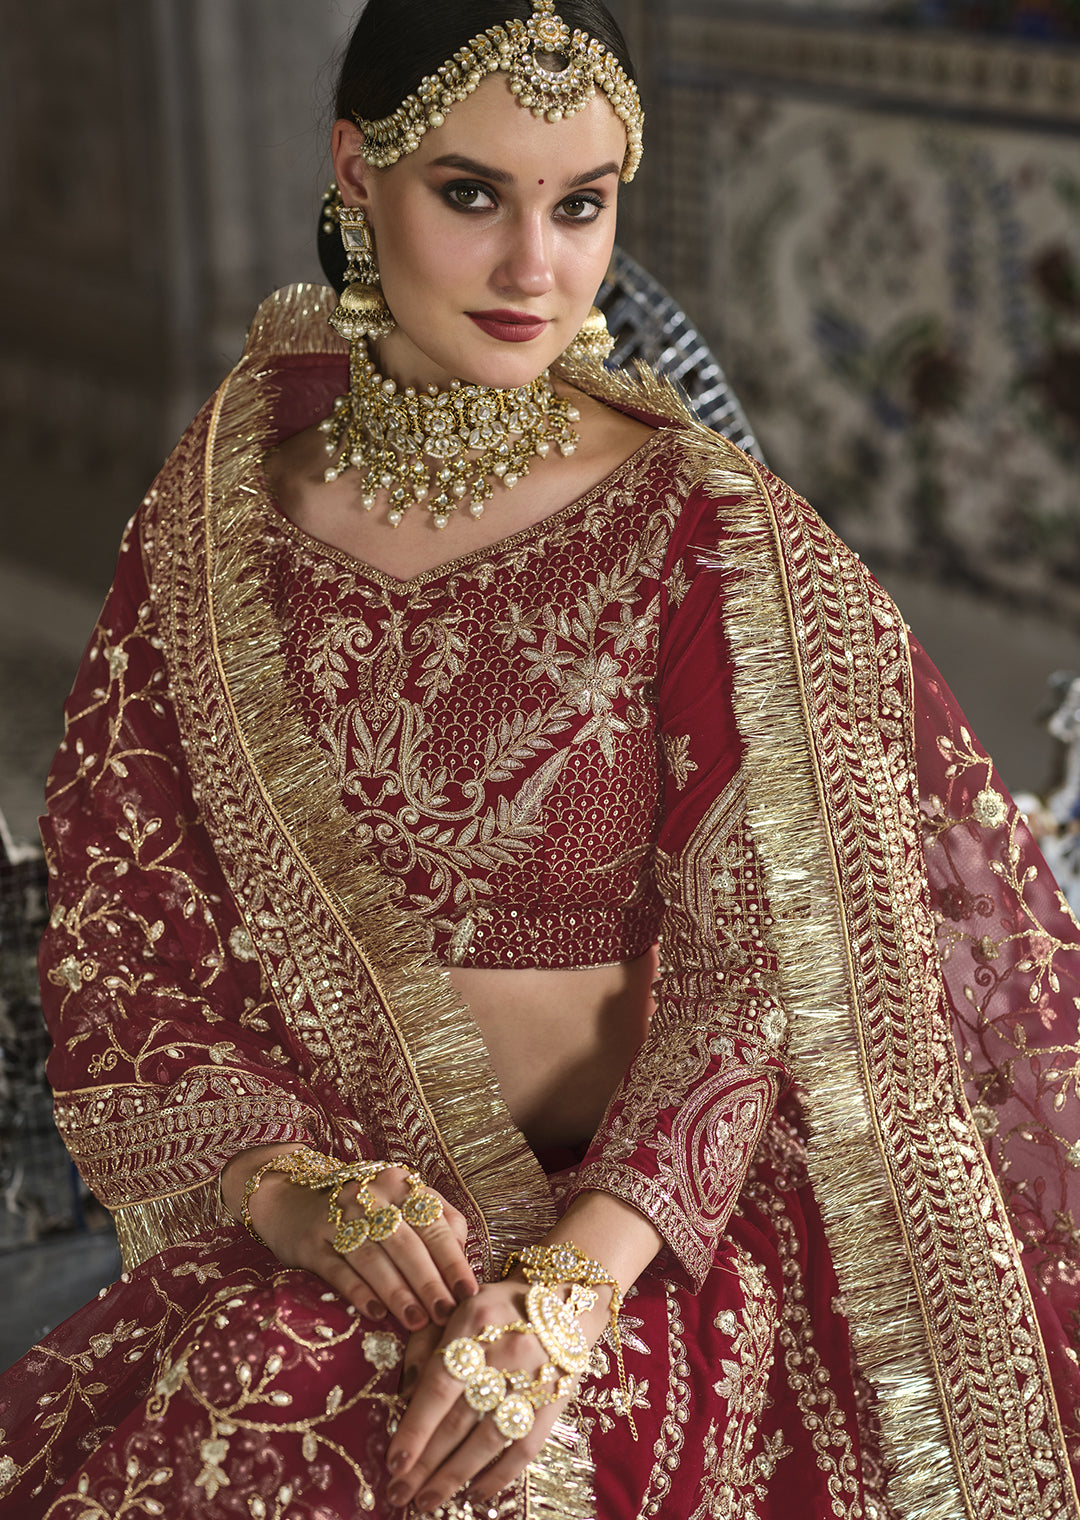 List of Top Bridal Makeup Artists in Bokaro - Best Bridal Beauty Services -  Justdial